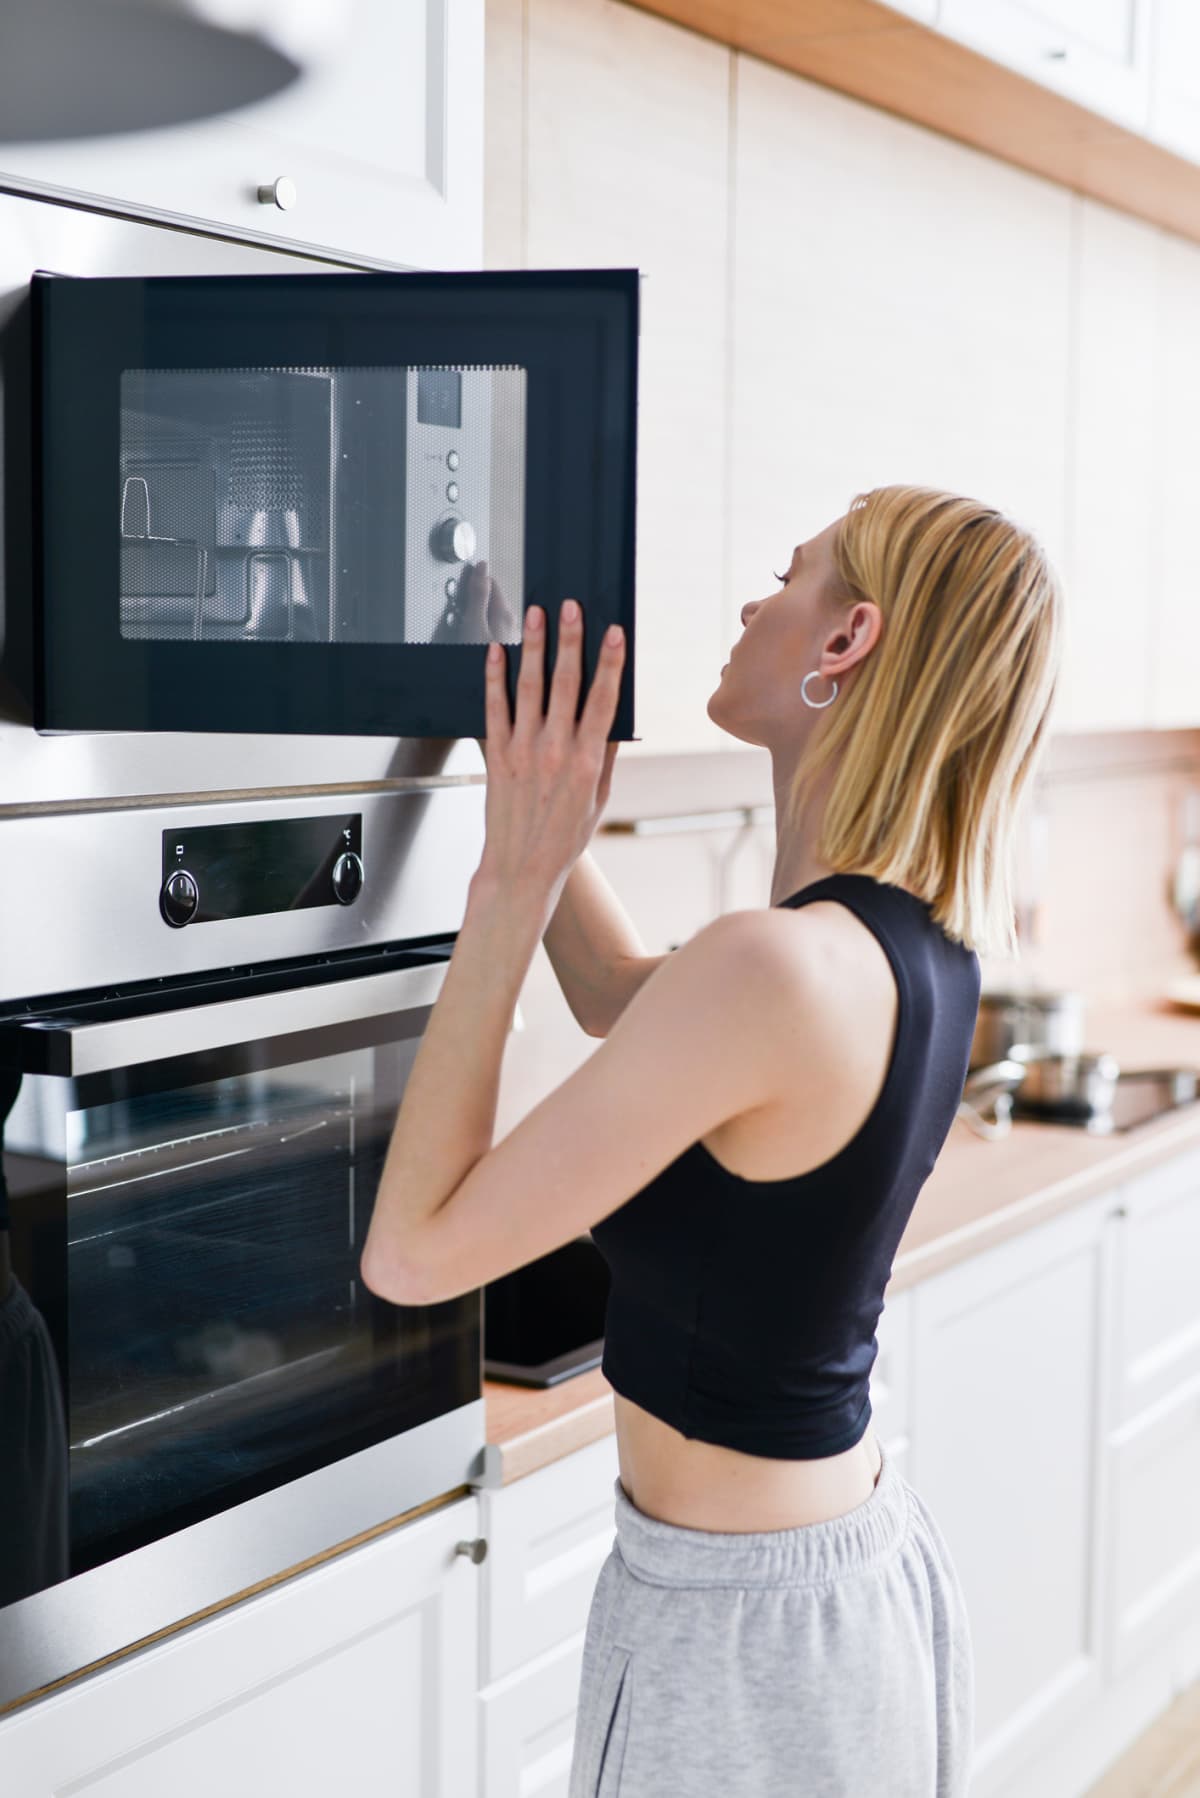 Woman heating food in the microwave.